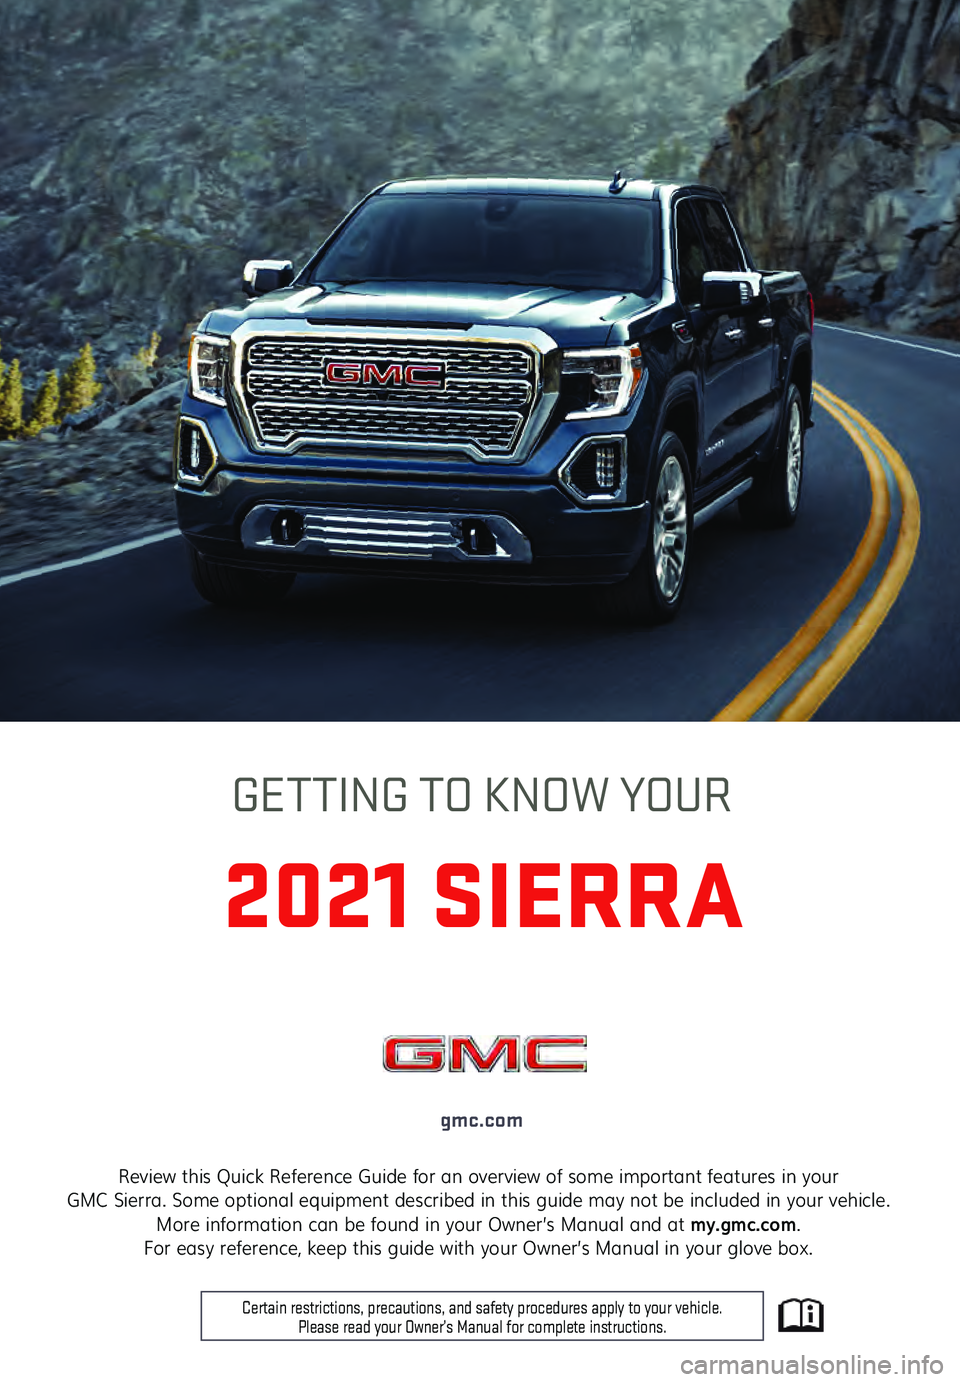 GMC SIERRA 2021  Get To Know Guide 